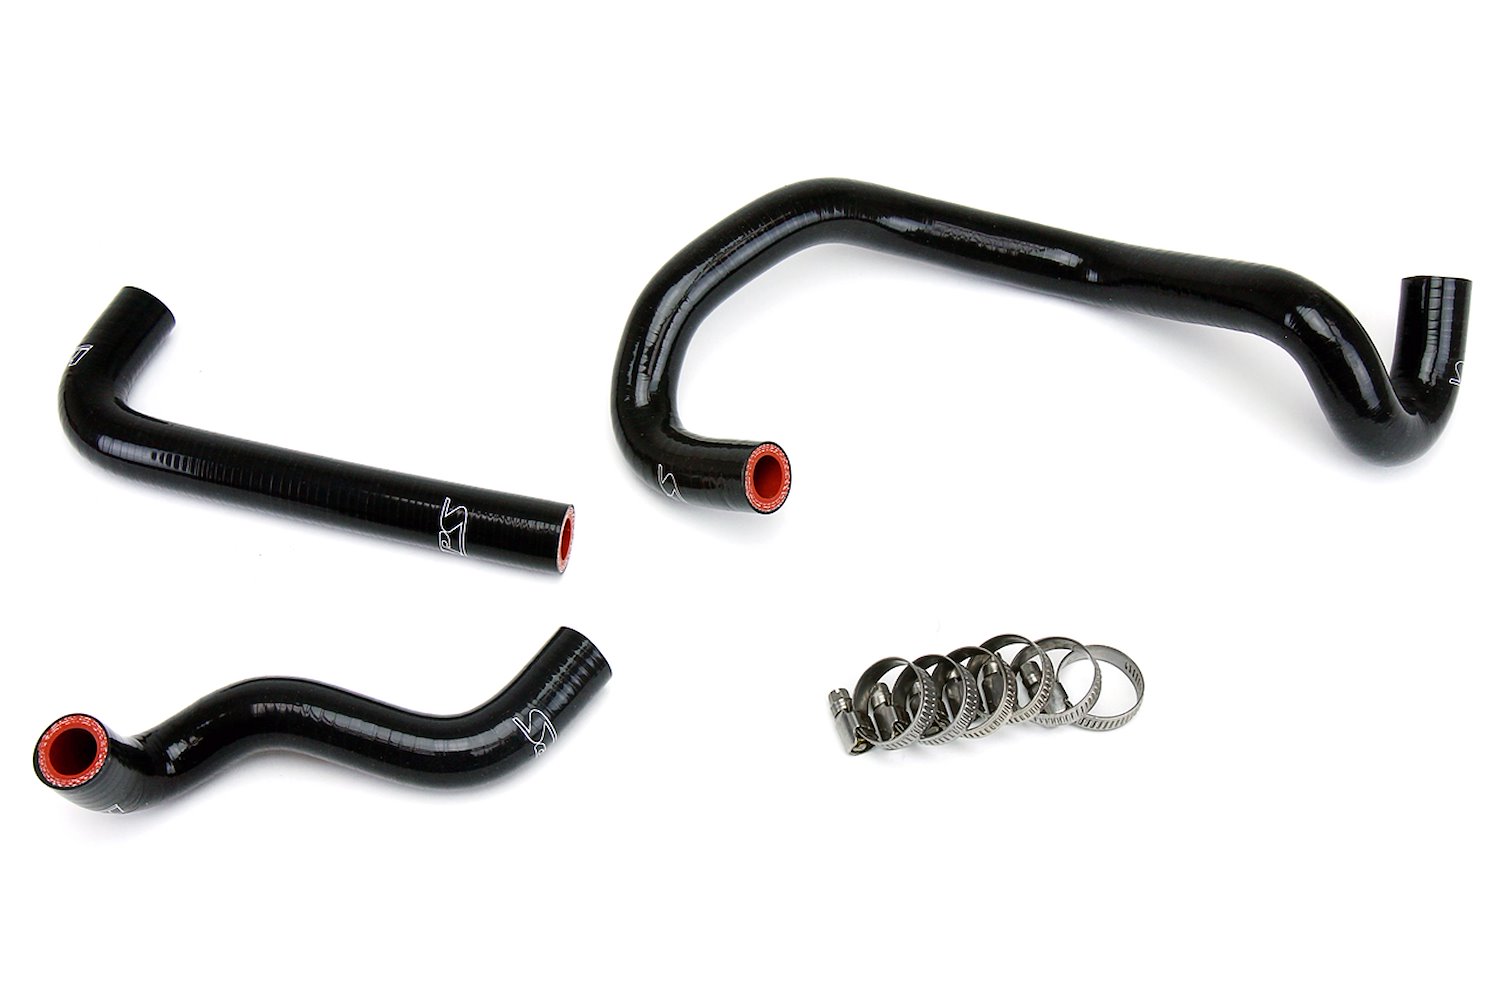 57-1421-BLK Heater Hose Kit, High-Temp 3-Ply Reinforced Silicone, Replace OEM Rubber Heater Coolant Hoses